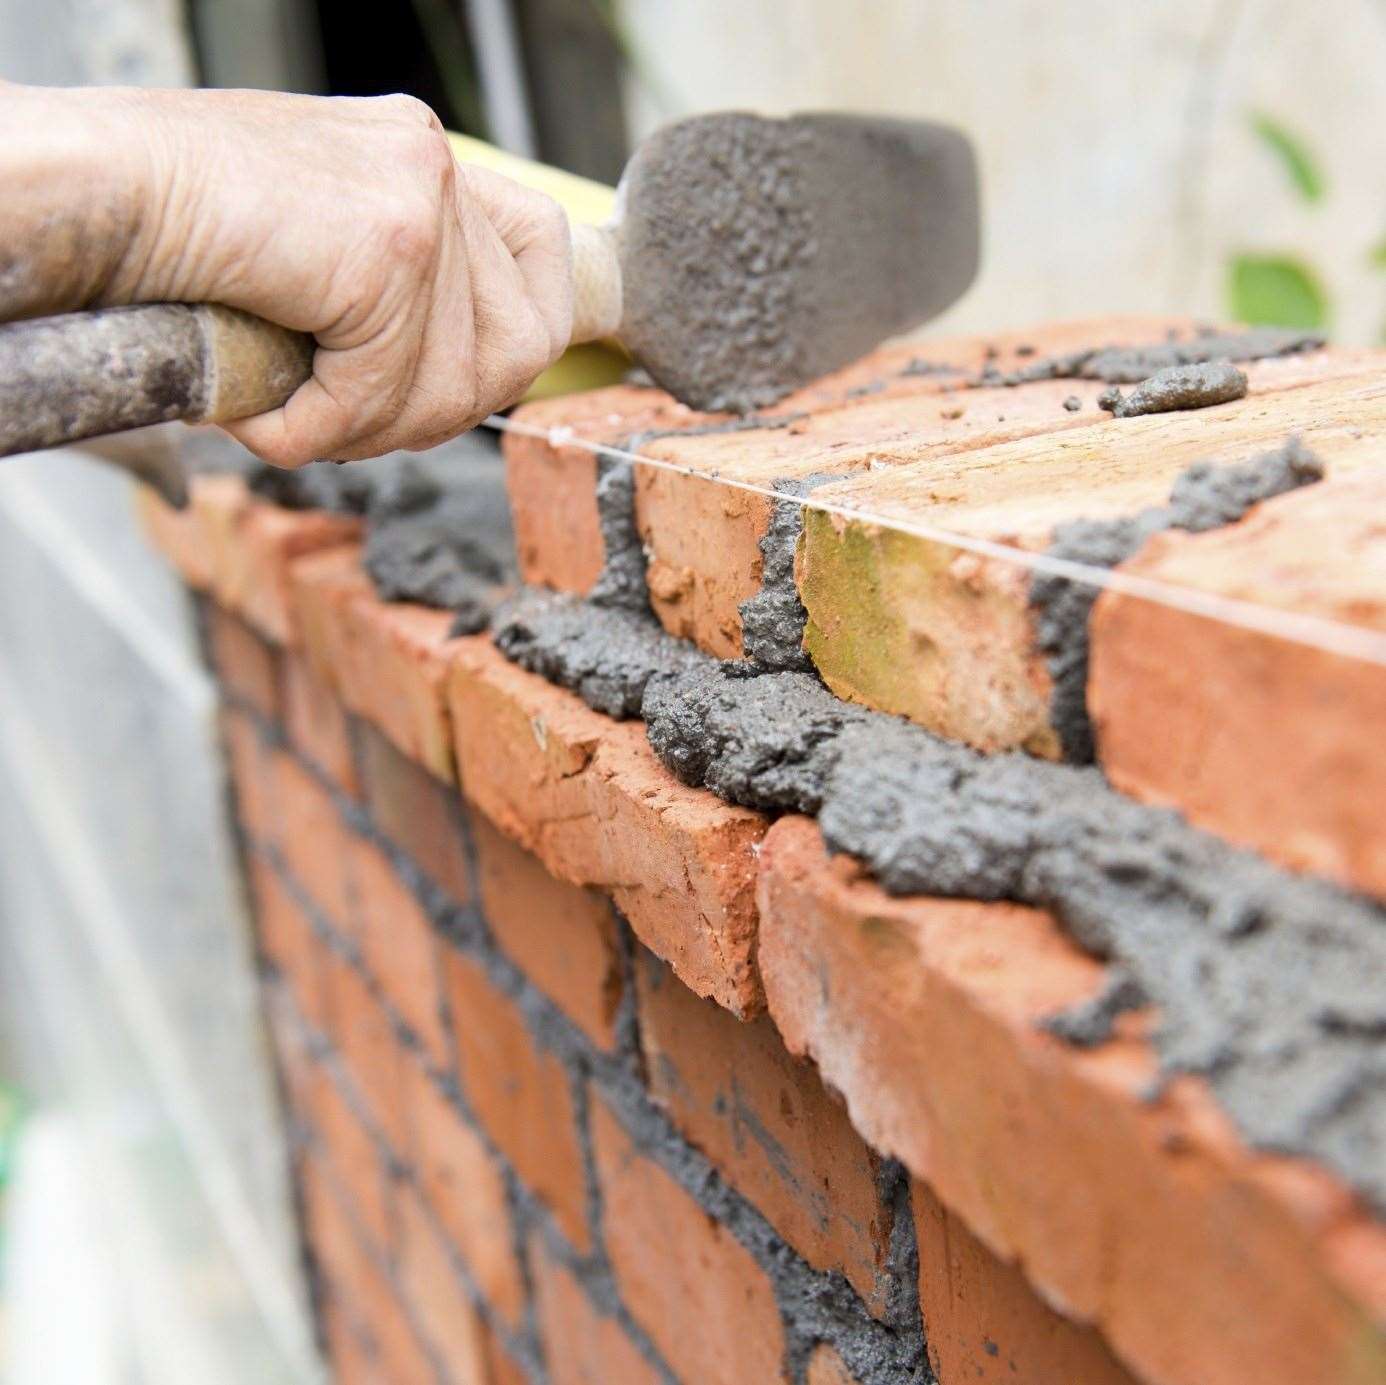 Structural issues, such as those involving walls, windows or the chimney breast, are supported by a warranty. Image: iStock.